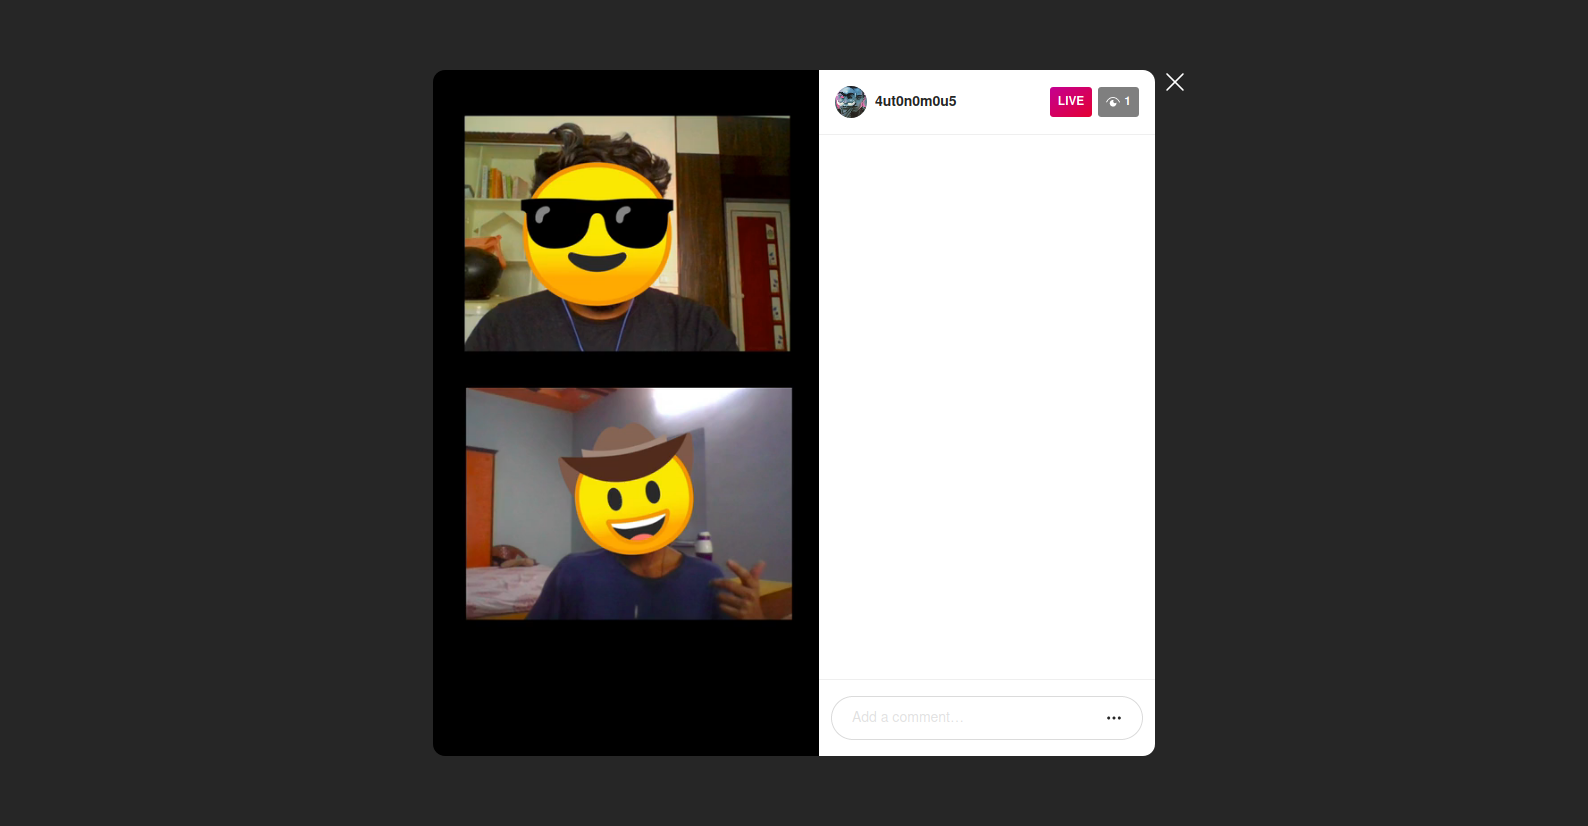 Streaming your calls in Instagram Lice